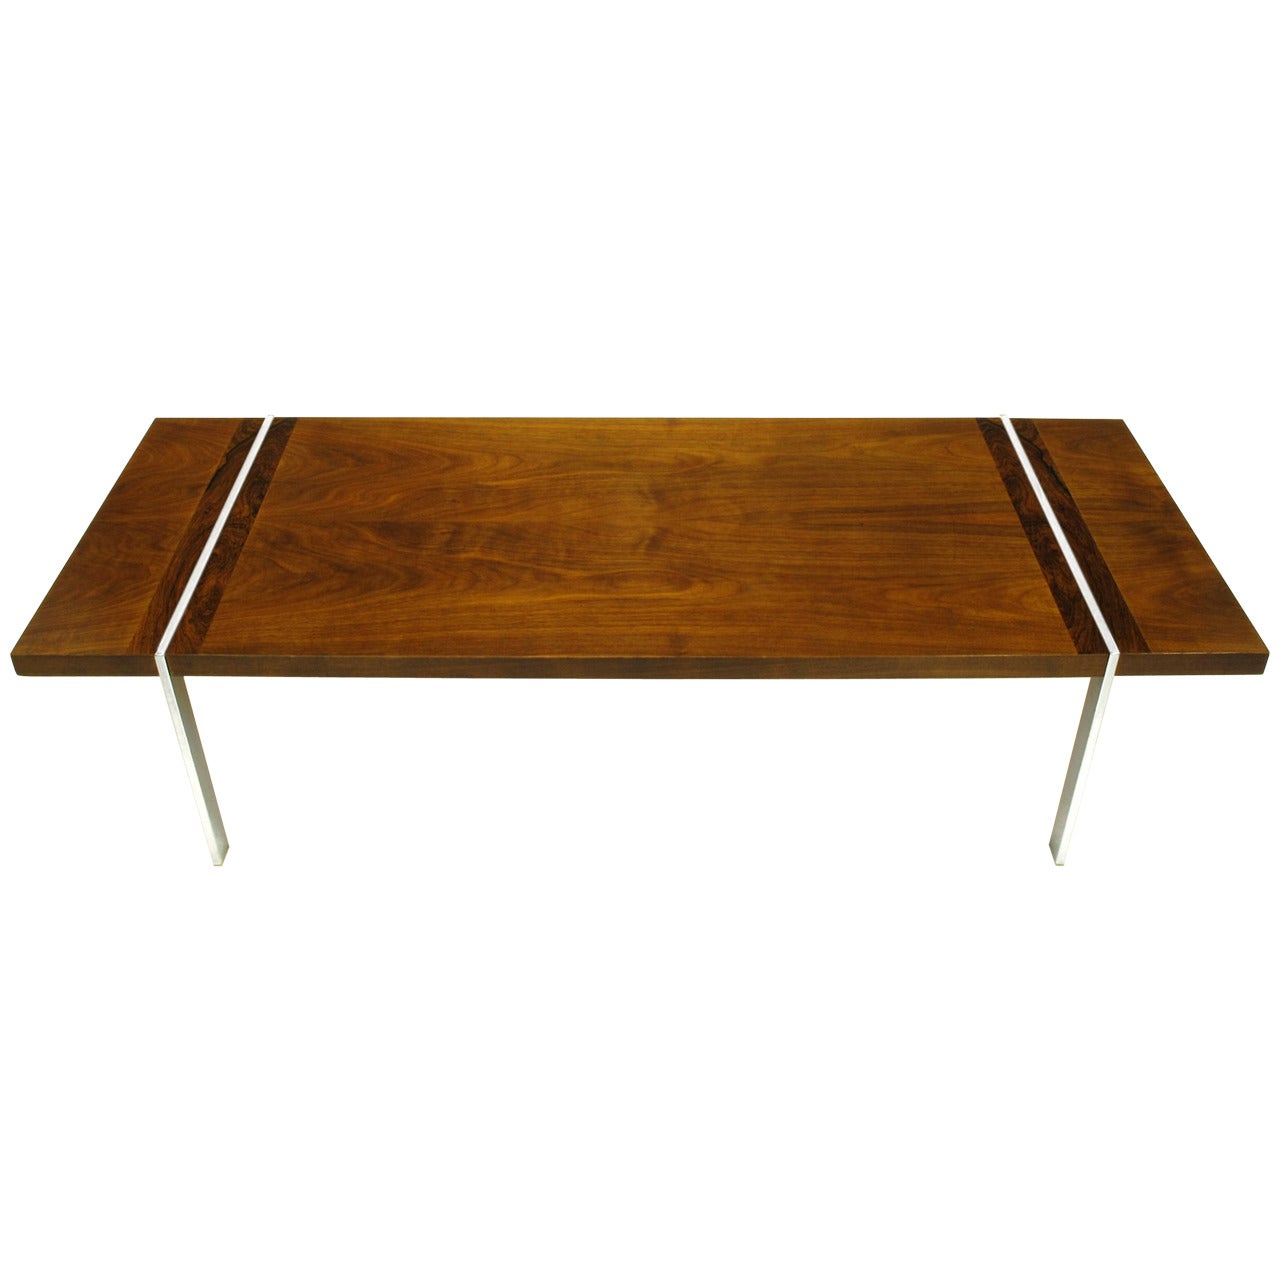 Chrome, Walnut and Rosewood Tripartite Coffee Table by Lane